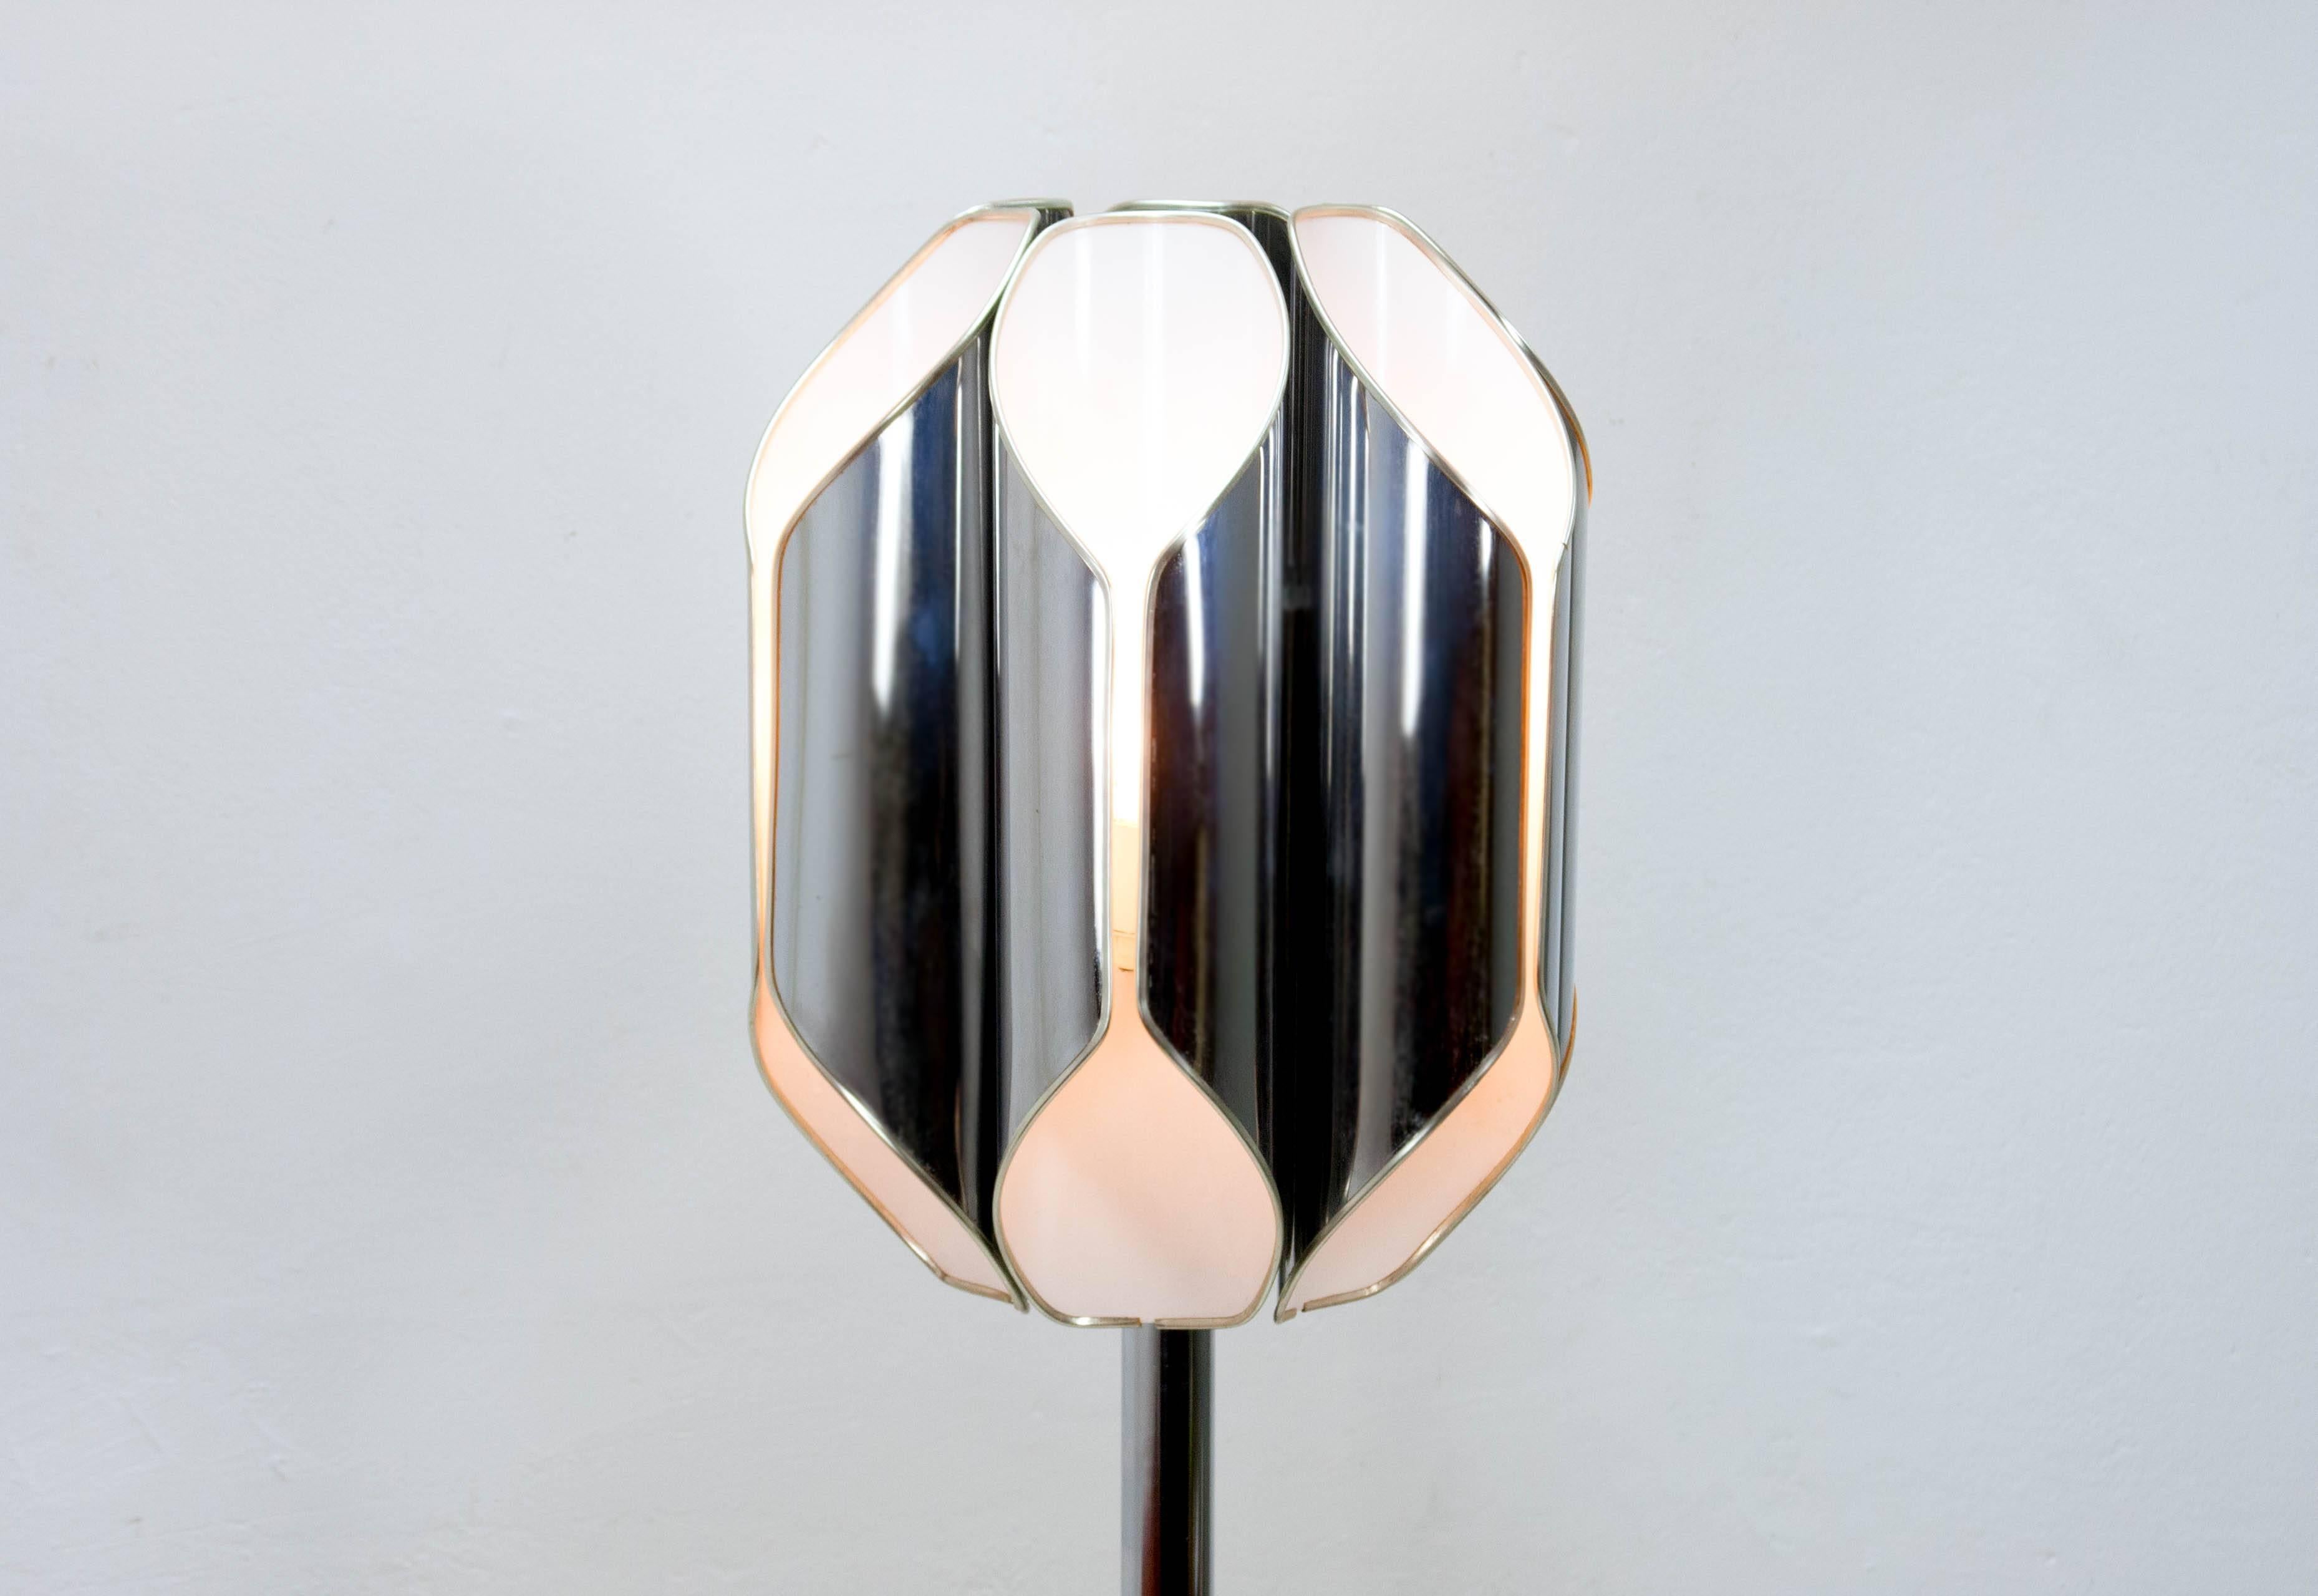 Spage Age chrome floor lamp by Reggiani featuring six armatures arranged around a central pole in a configuration resembling a rocket's thrusters.